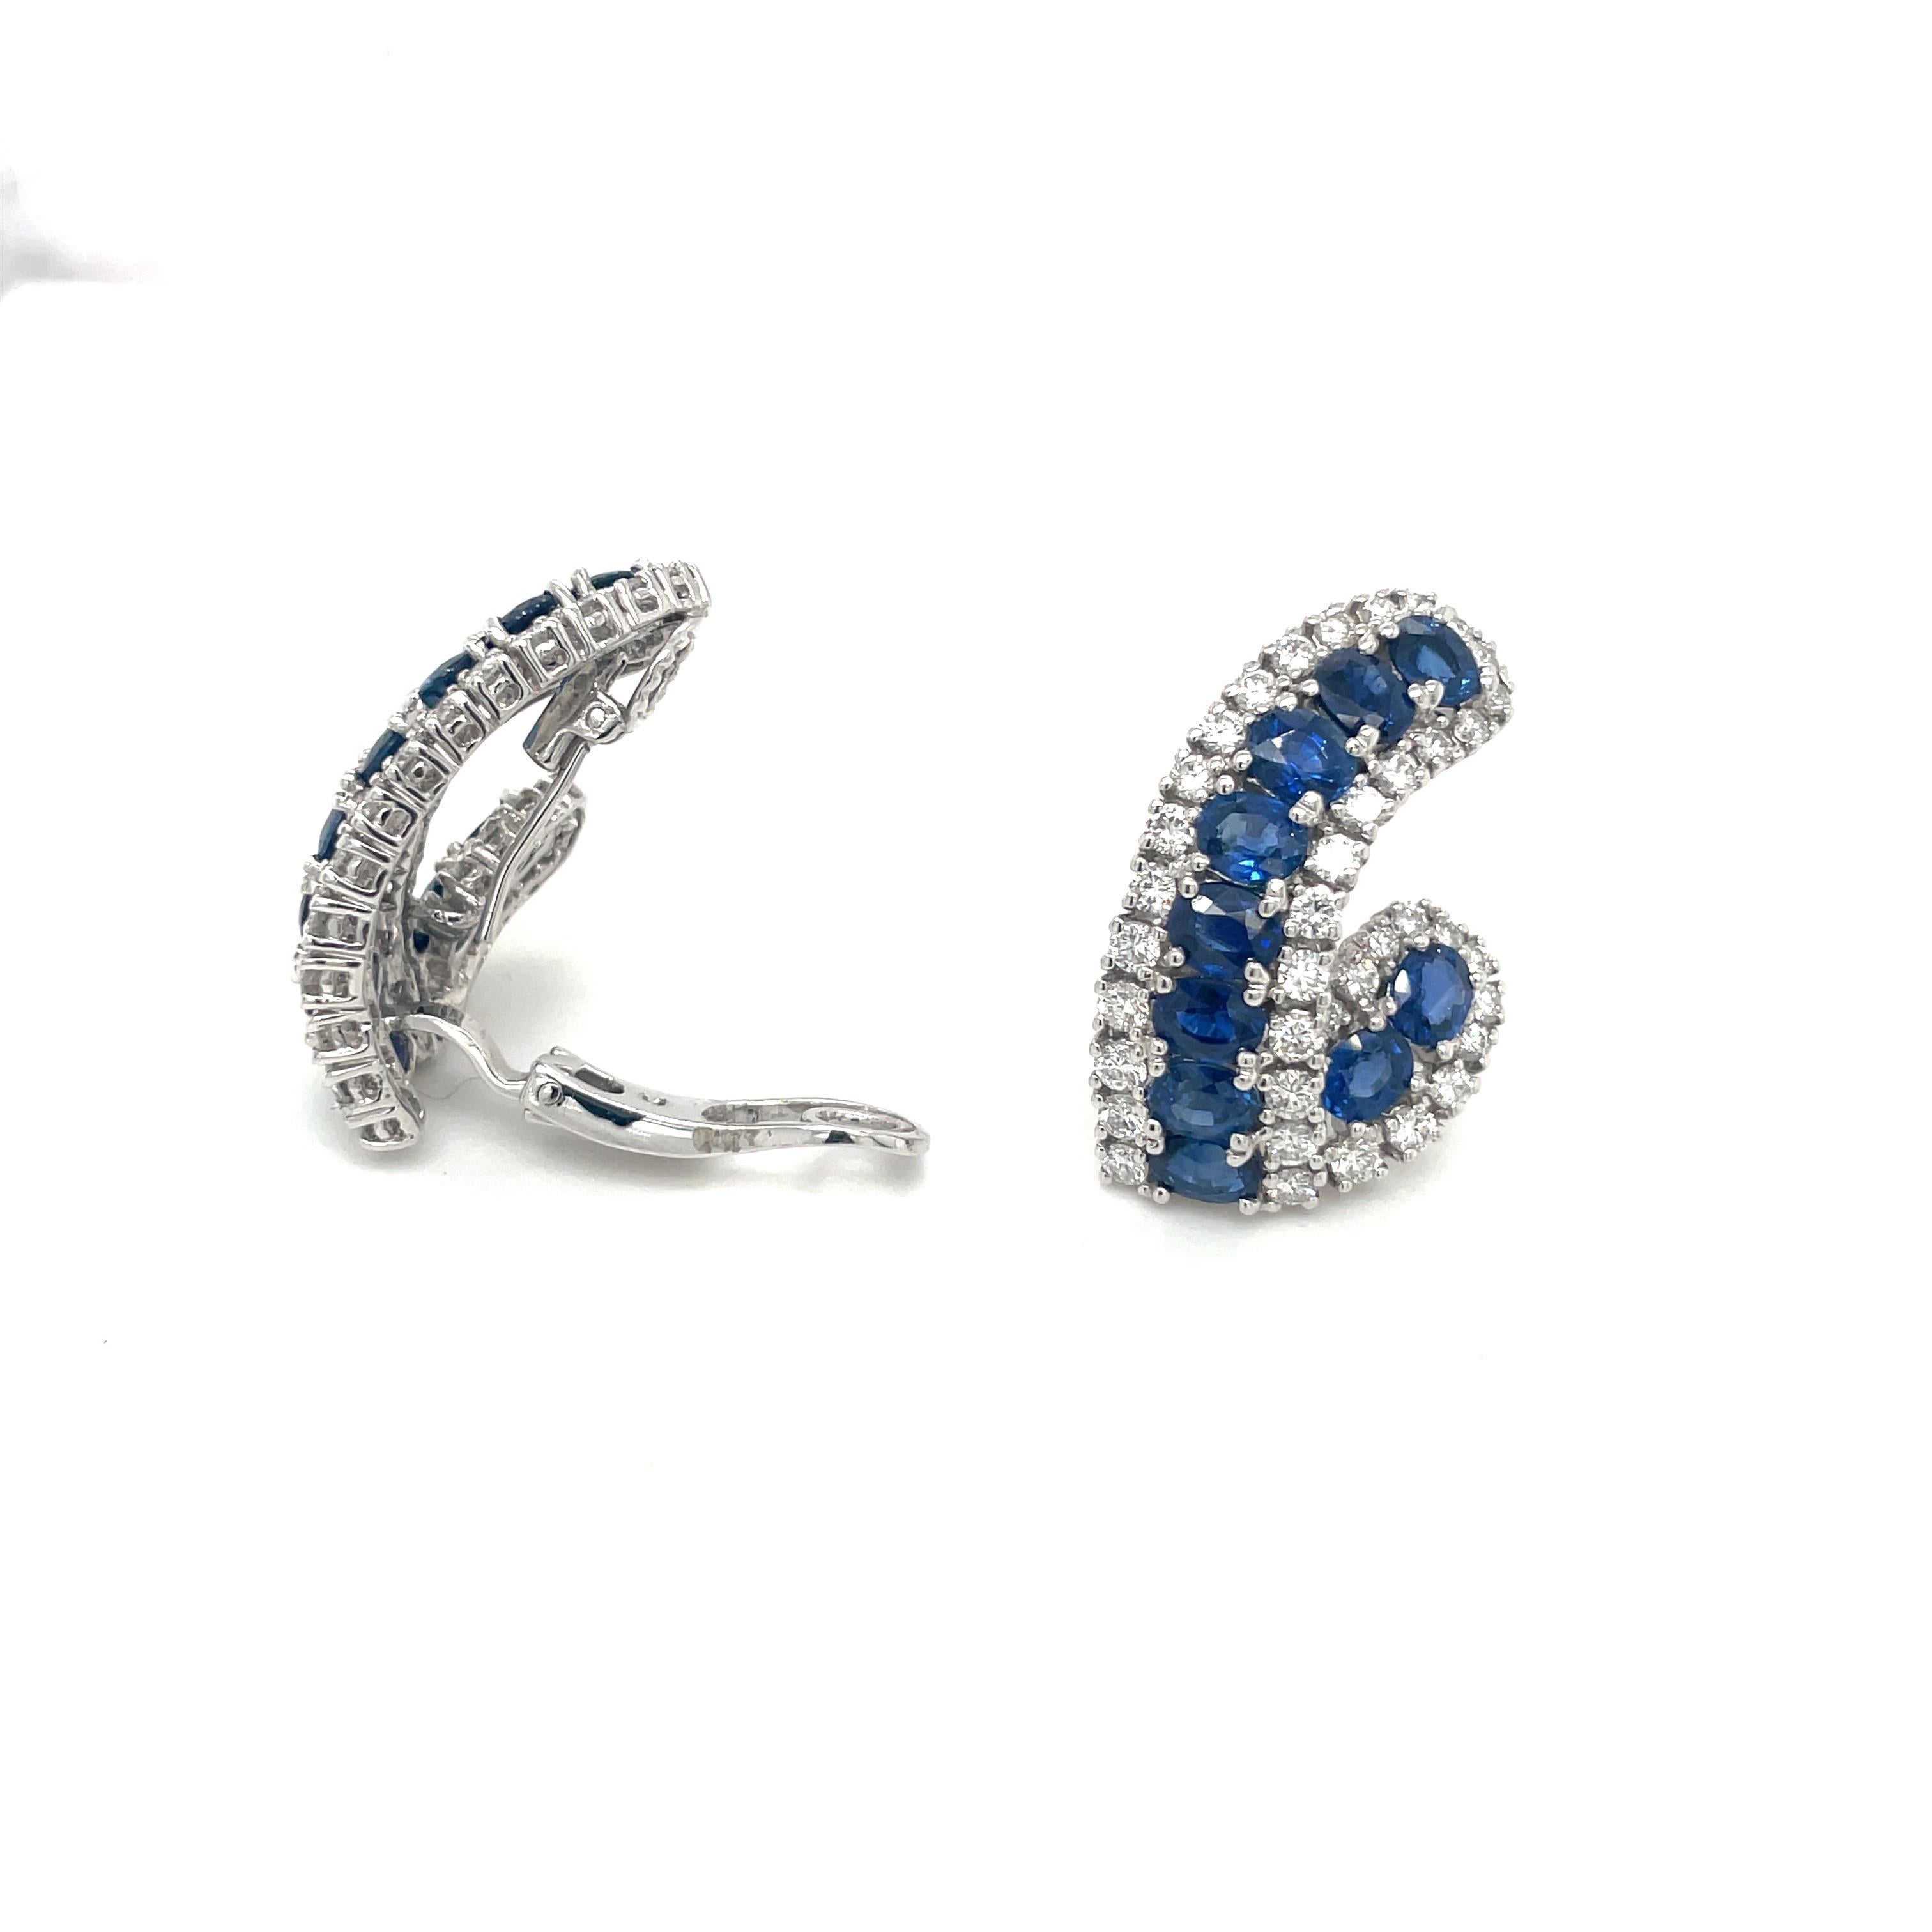 18KT White Gold 9.38Ct Blue Sapphire 2.97Ct. Diamond Earrings For Sale 1